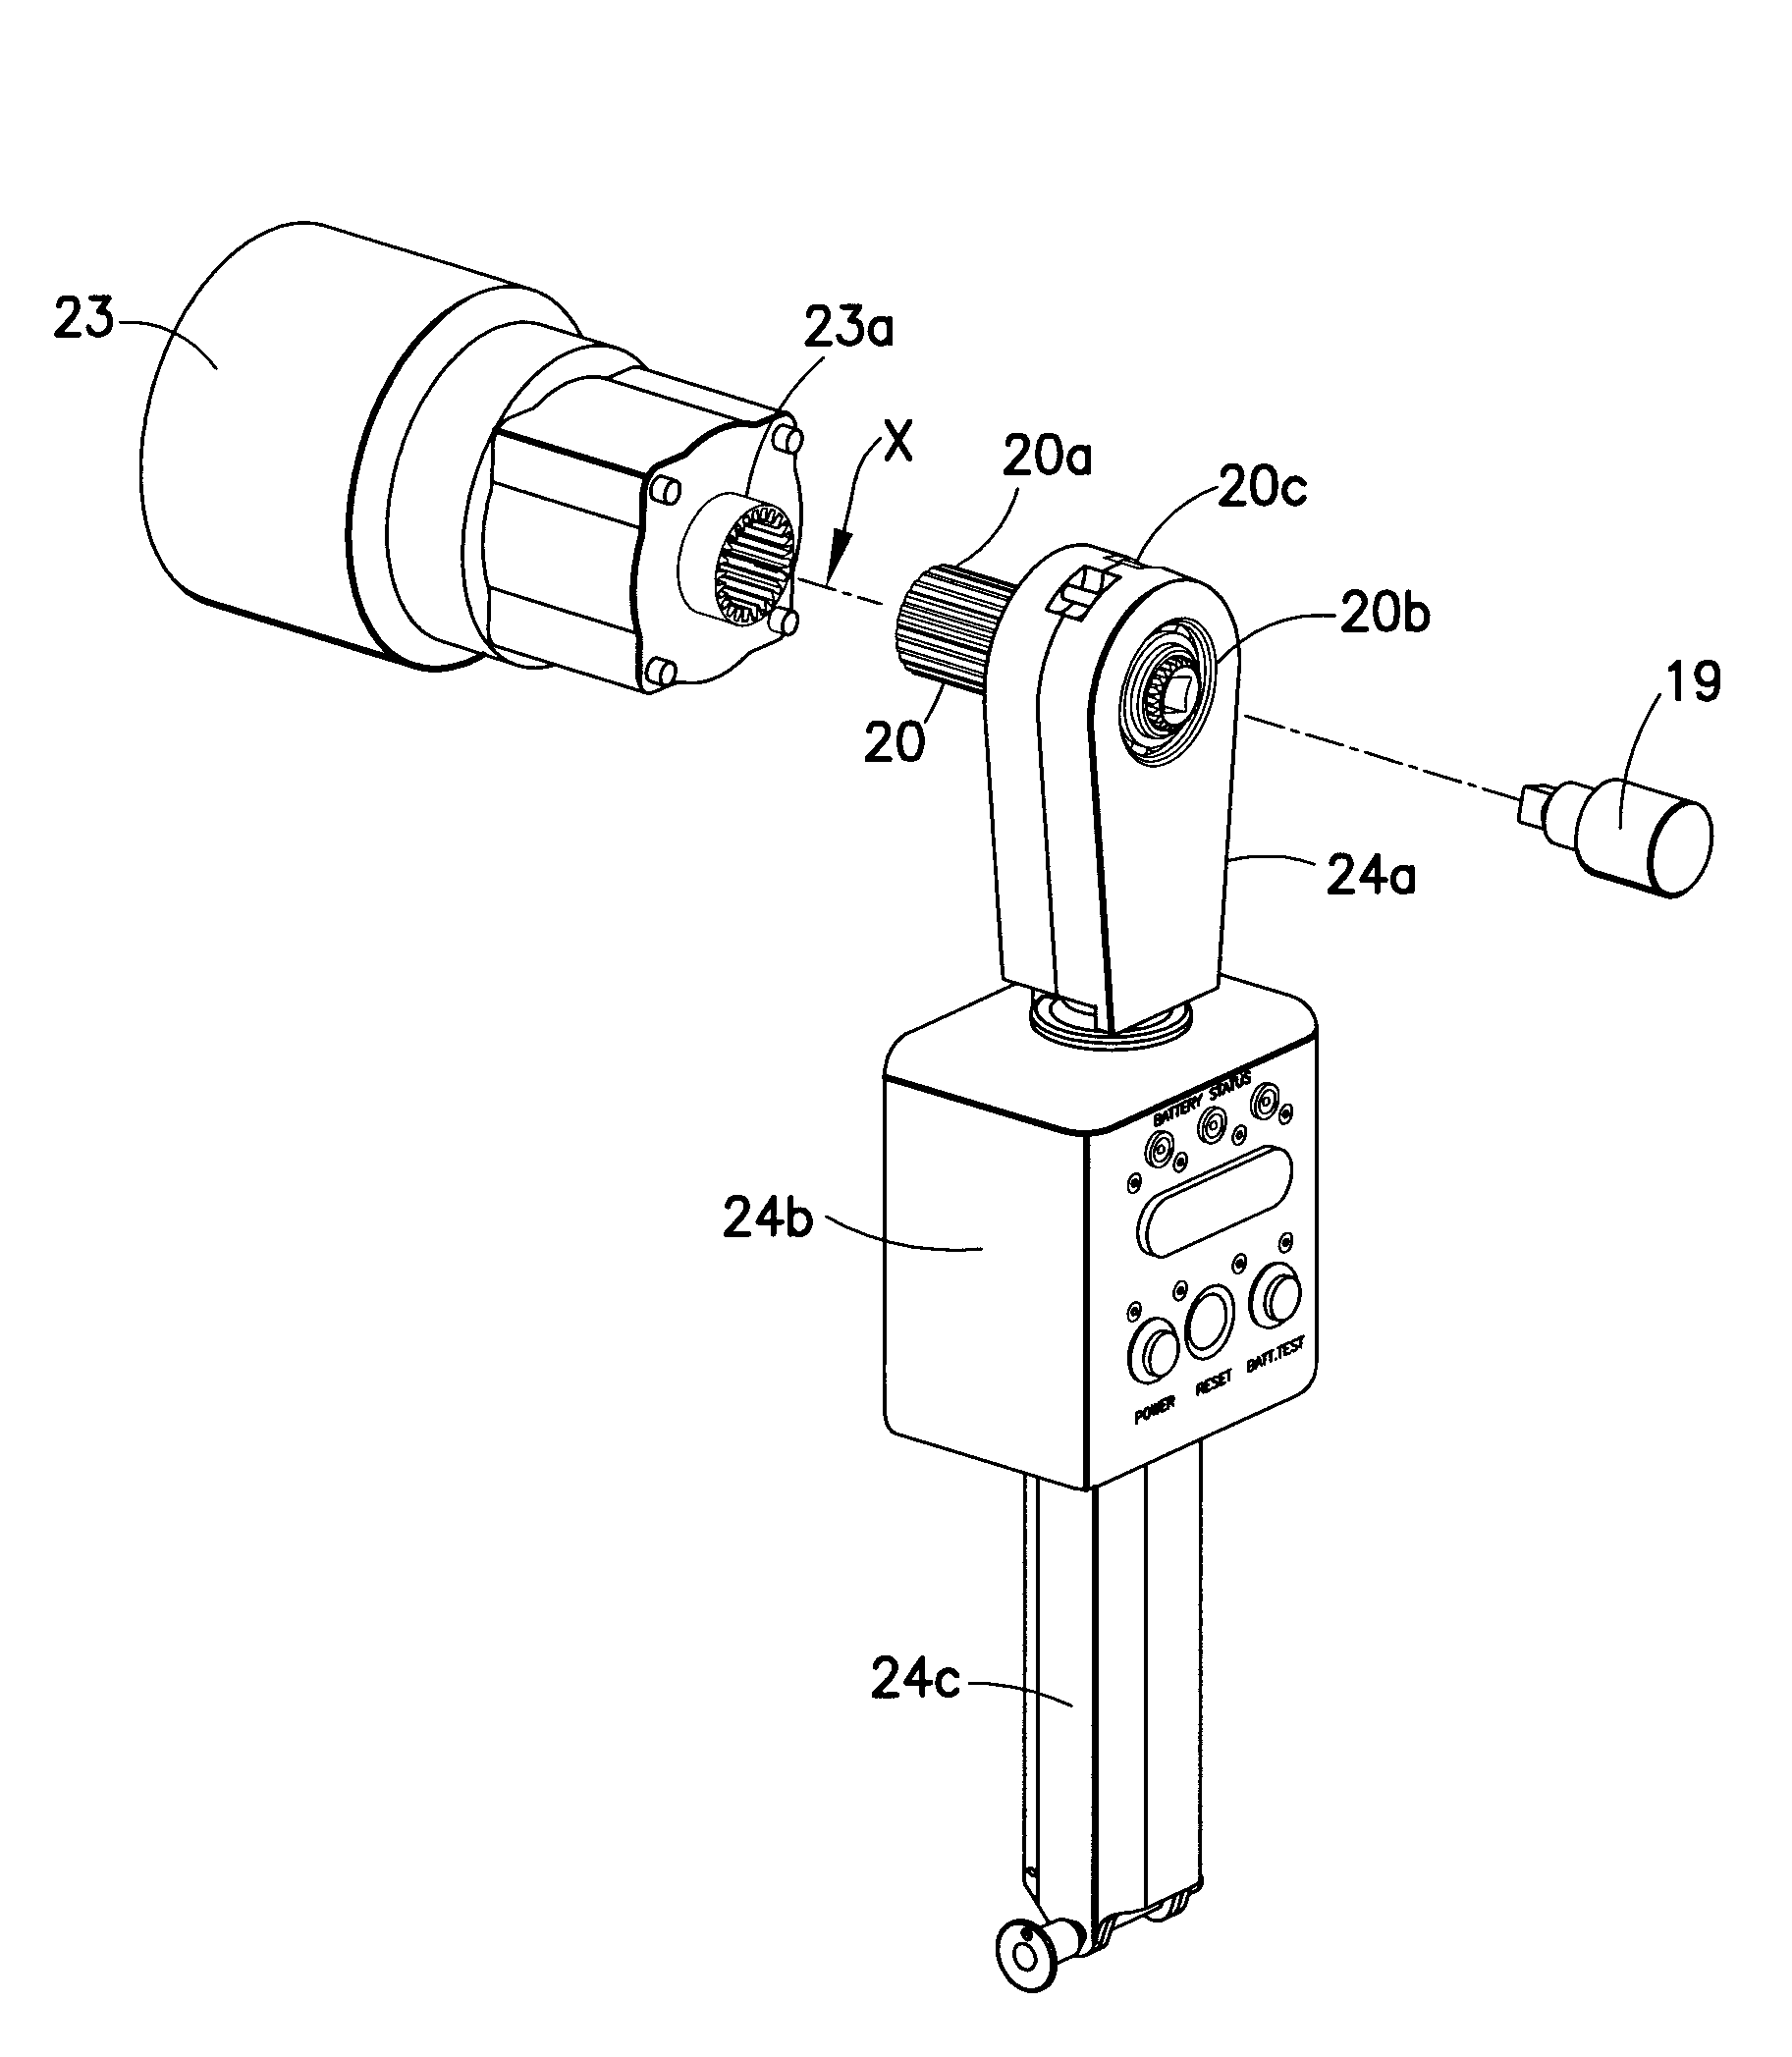 Revolution counter for turning assemblies